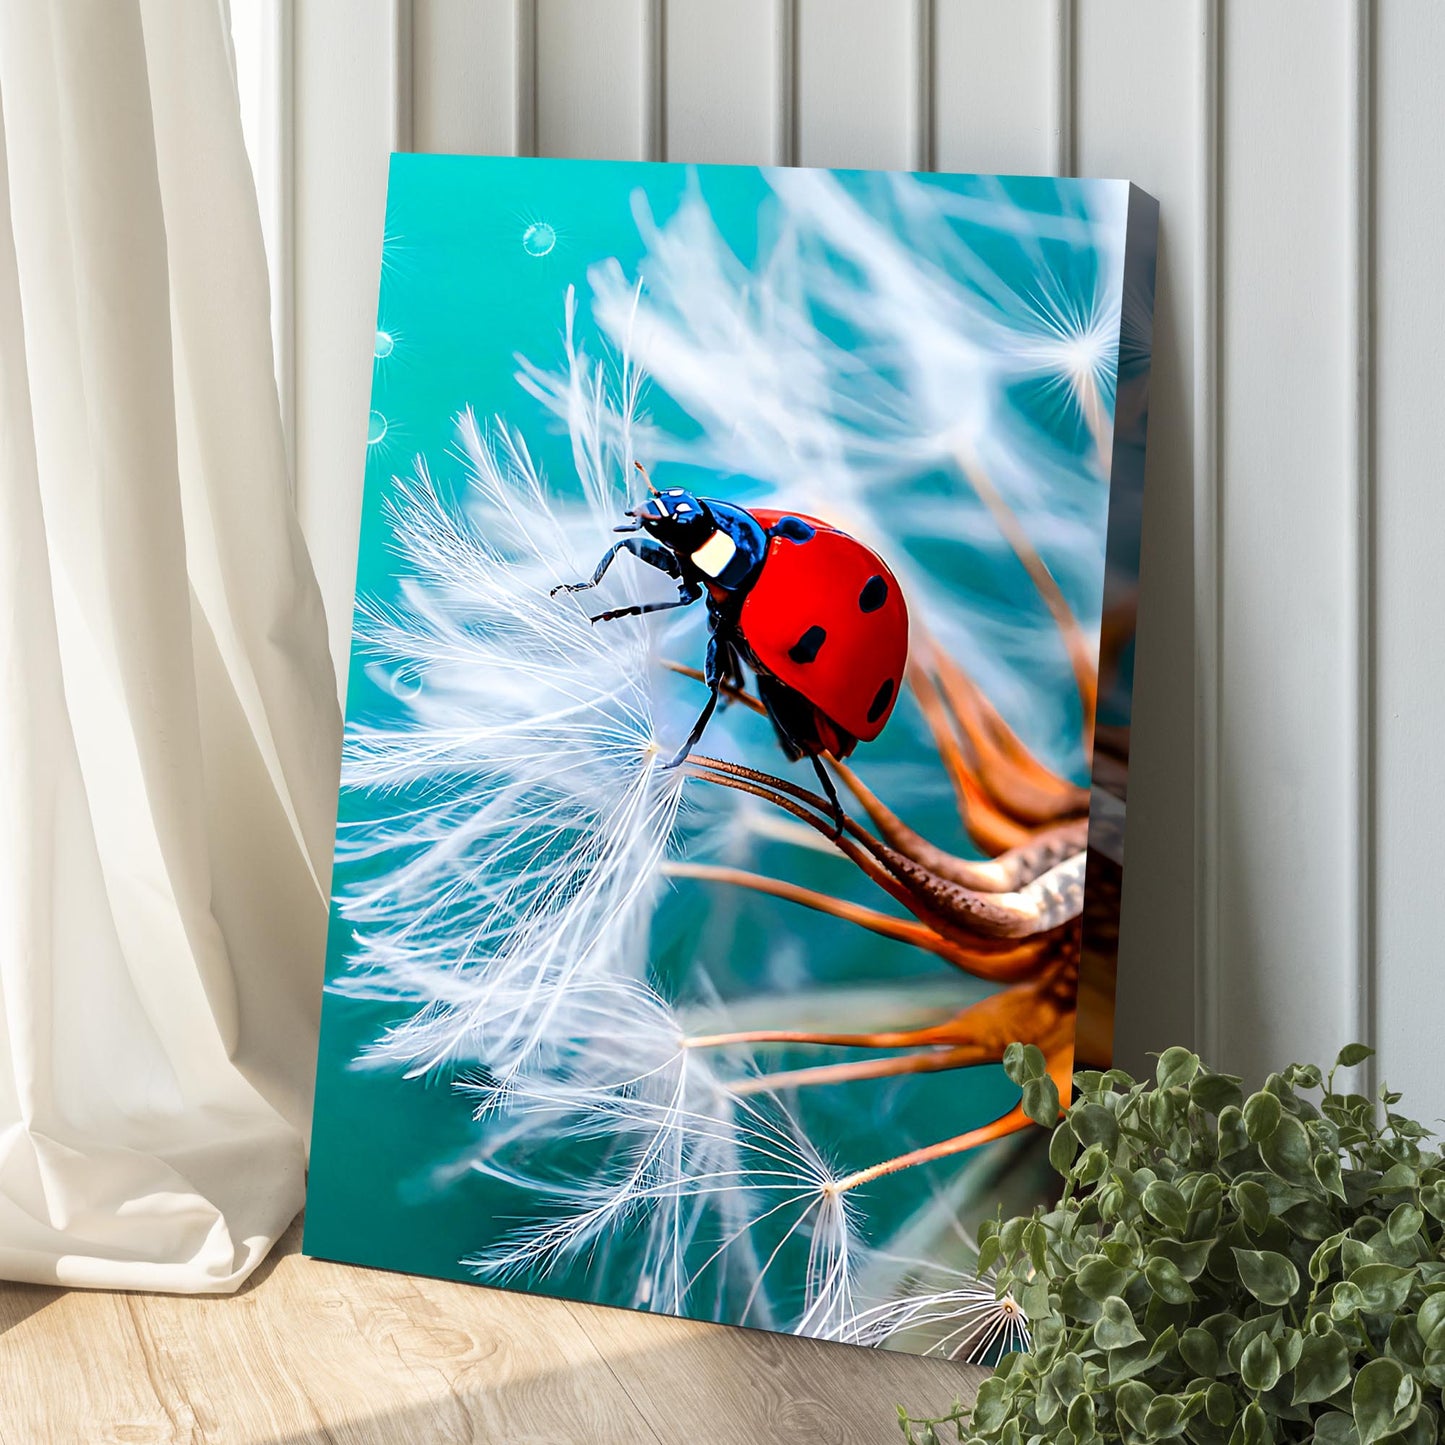 Insect Ladybug Dandelion Flower Canvas Wall Art Style 1 - Image by Tailored Canvases